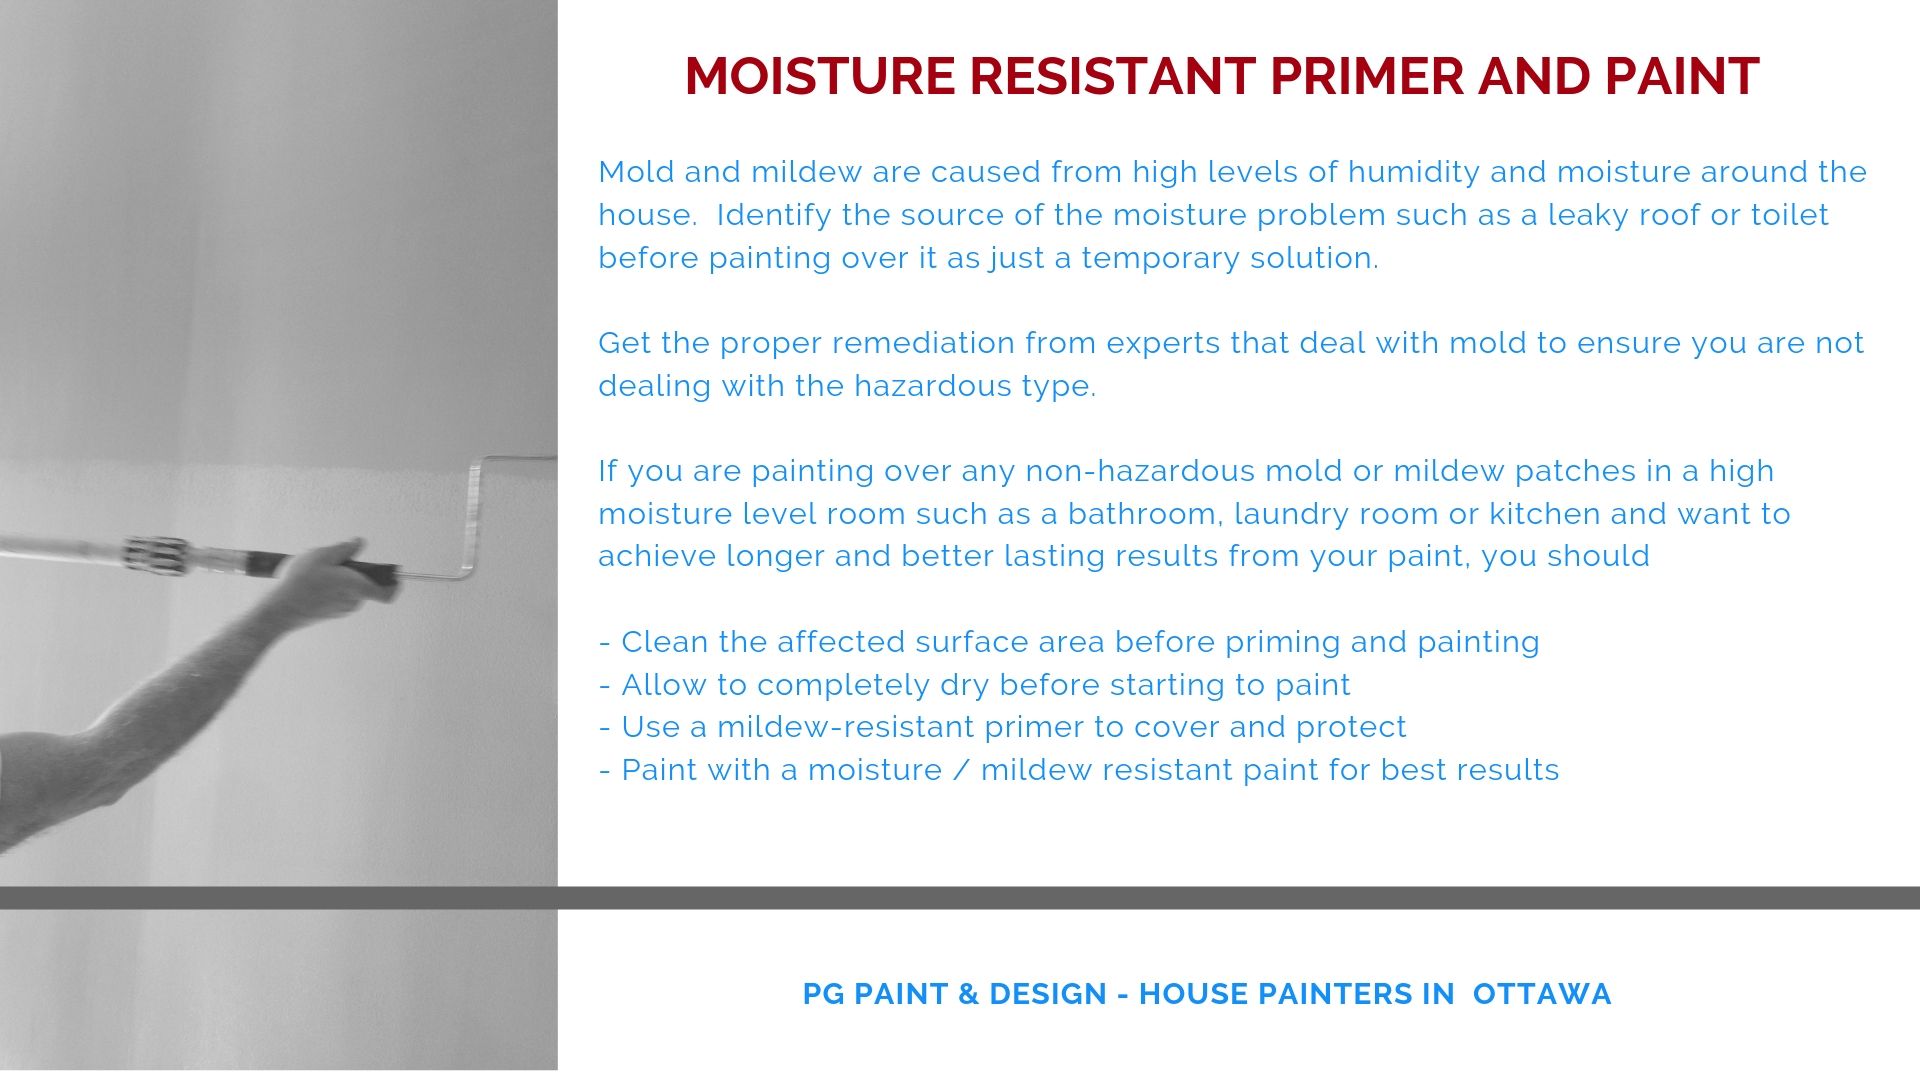 mildew resistant paint primer applied before painting helps prevent mold and mildew 